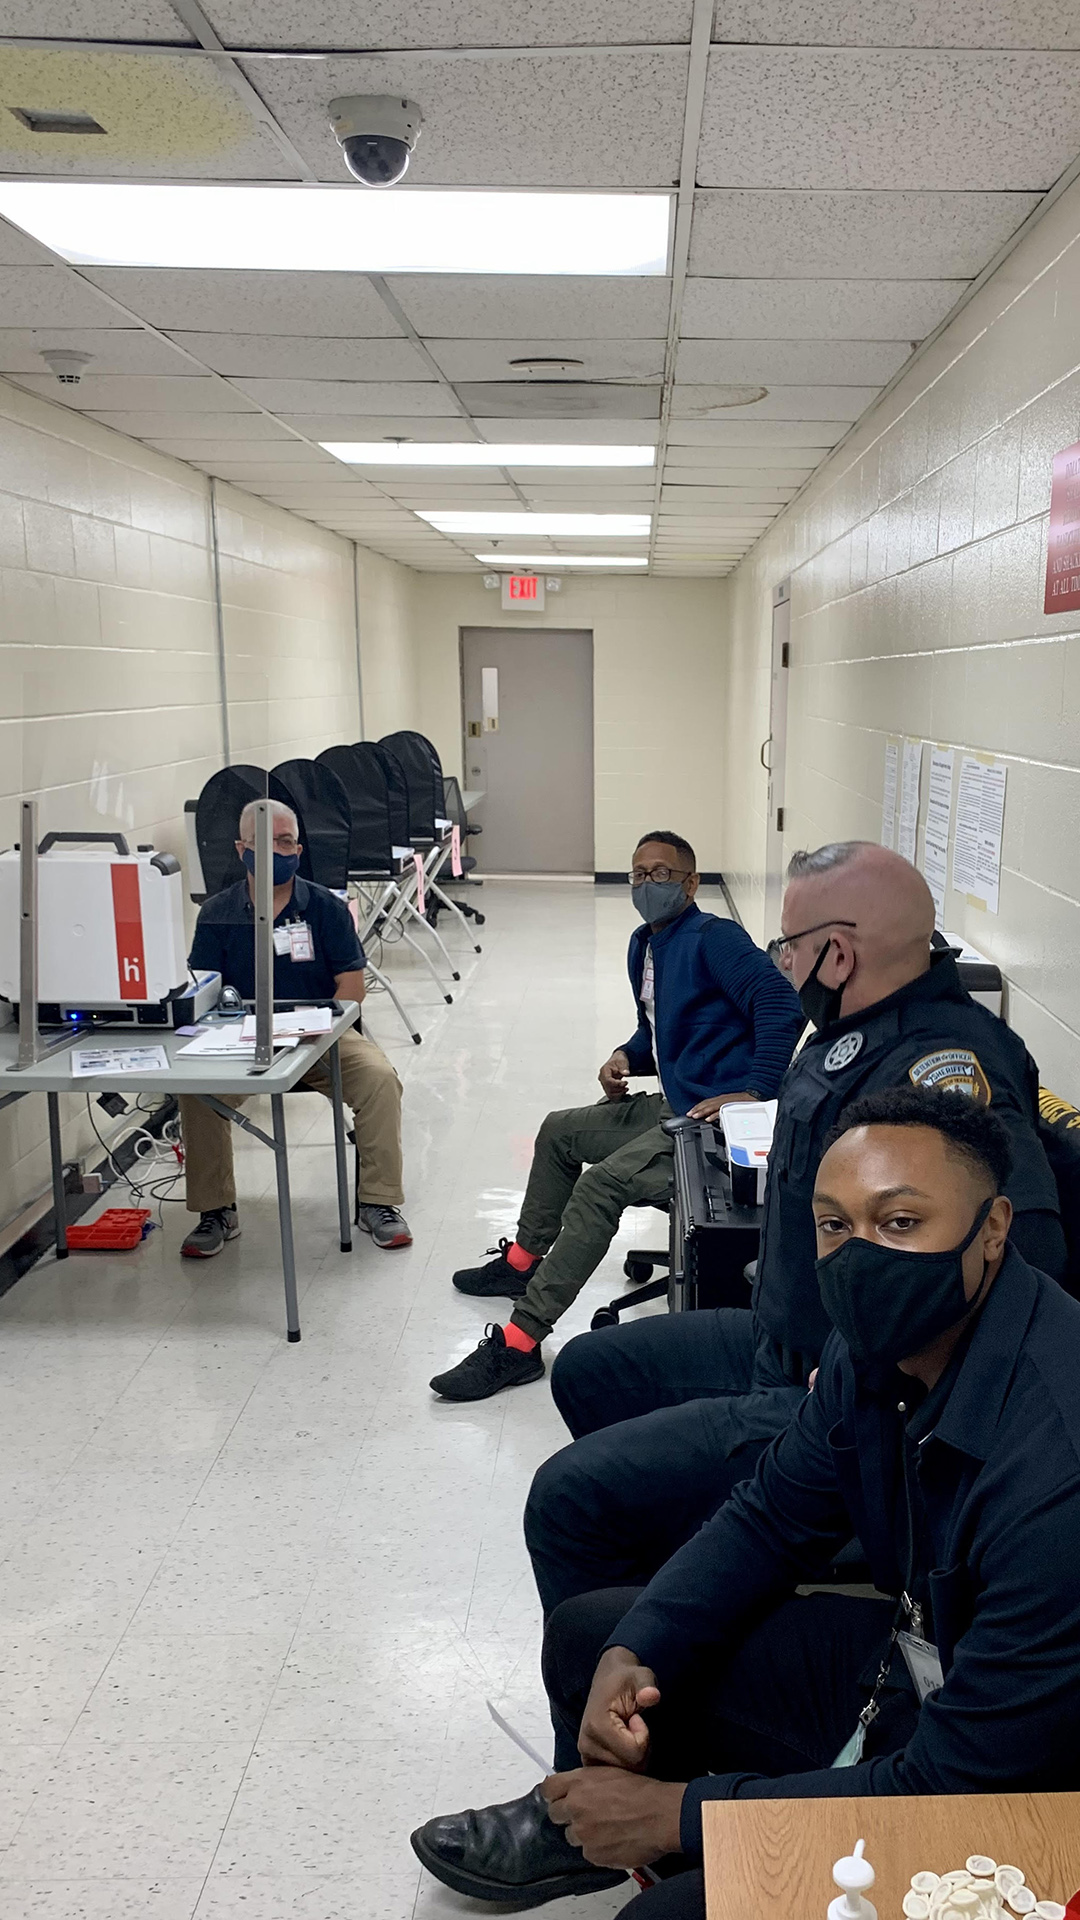 Jail staff wearing face masks sit at stations for inmate voting in a hallway with painted concrete block walls and fluorescent lights.